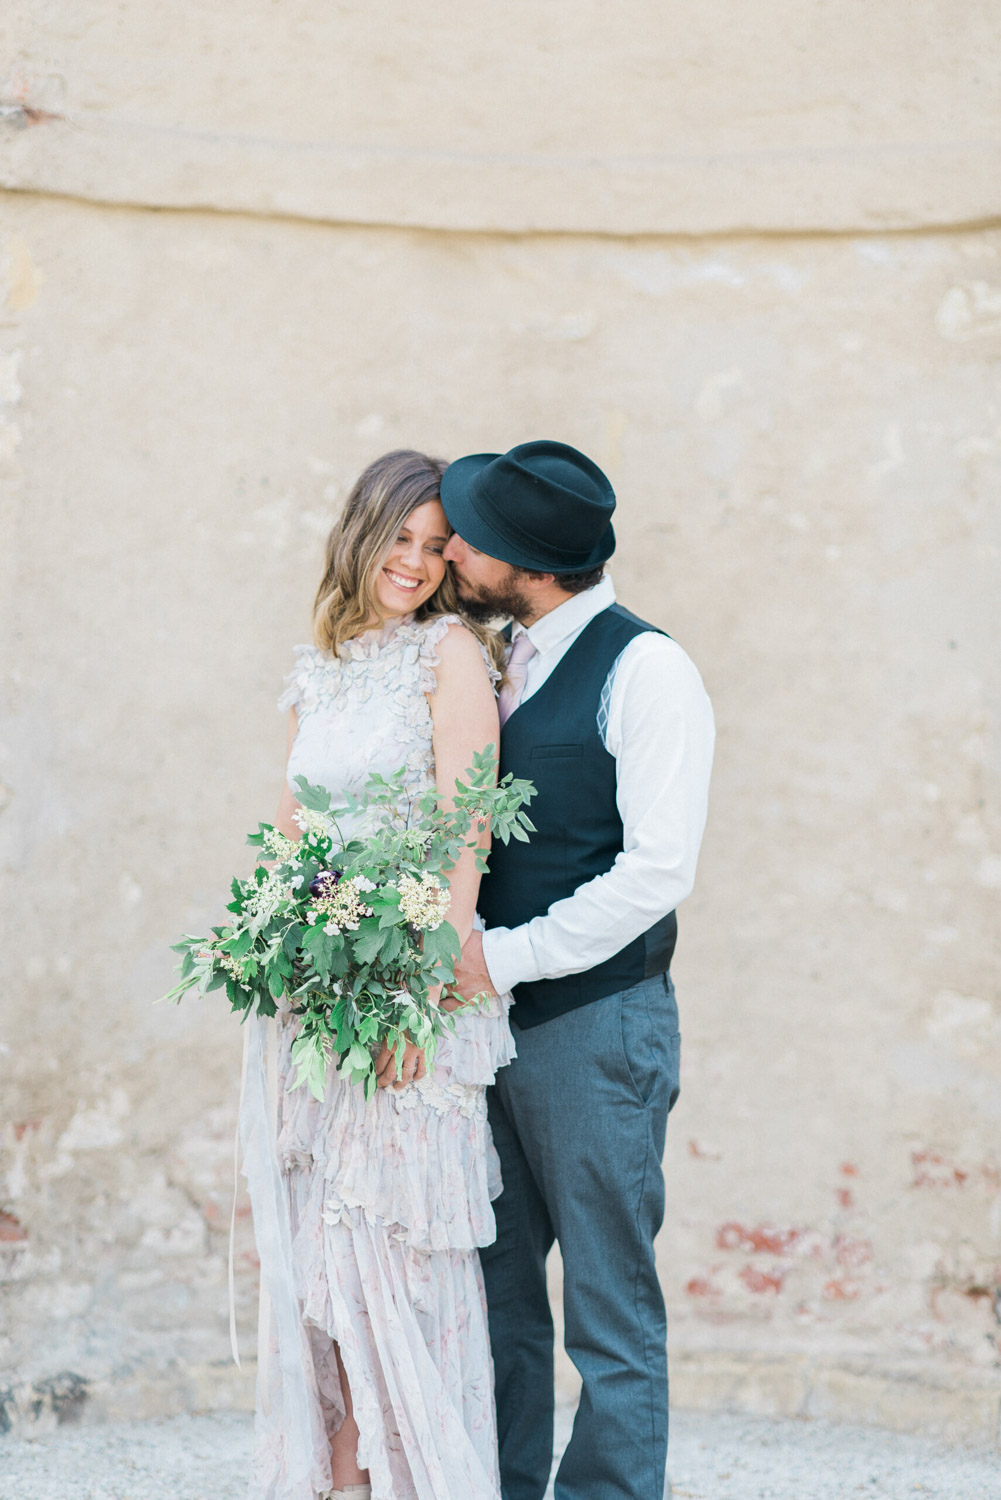 Fine Art Destination Wedding Photographer in Europe by Nicole Mihelic | Wedding Photographer France and Italy